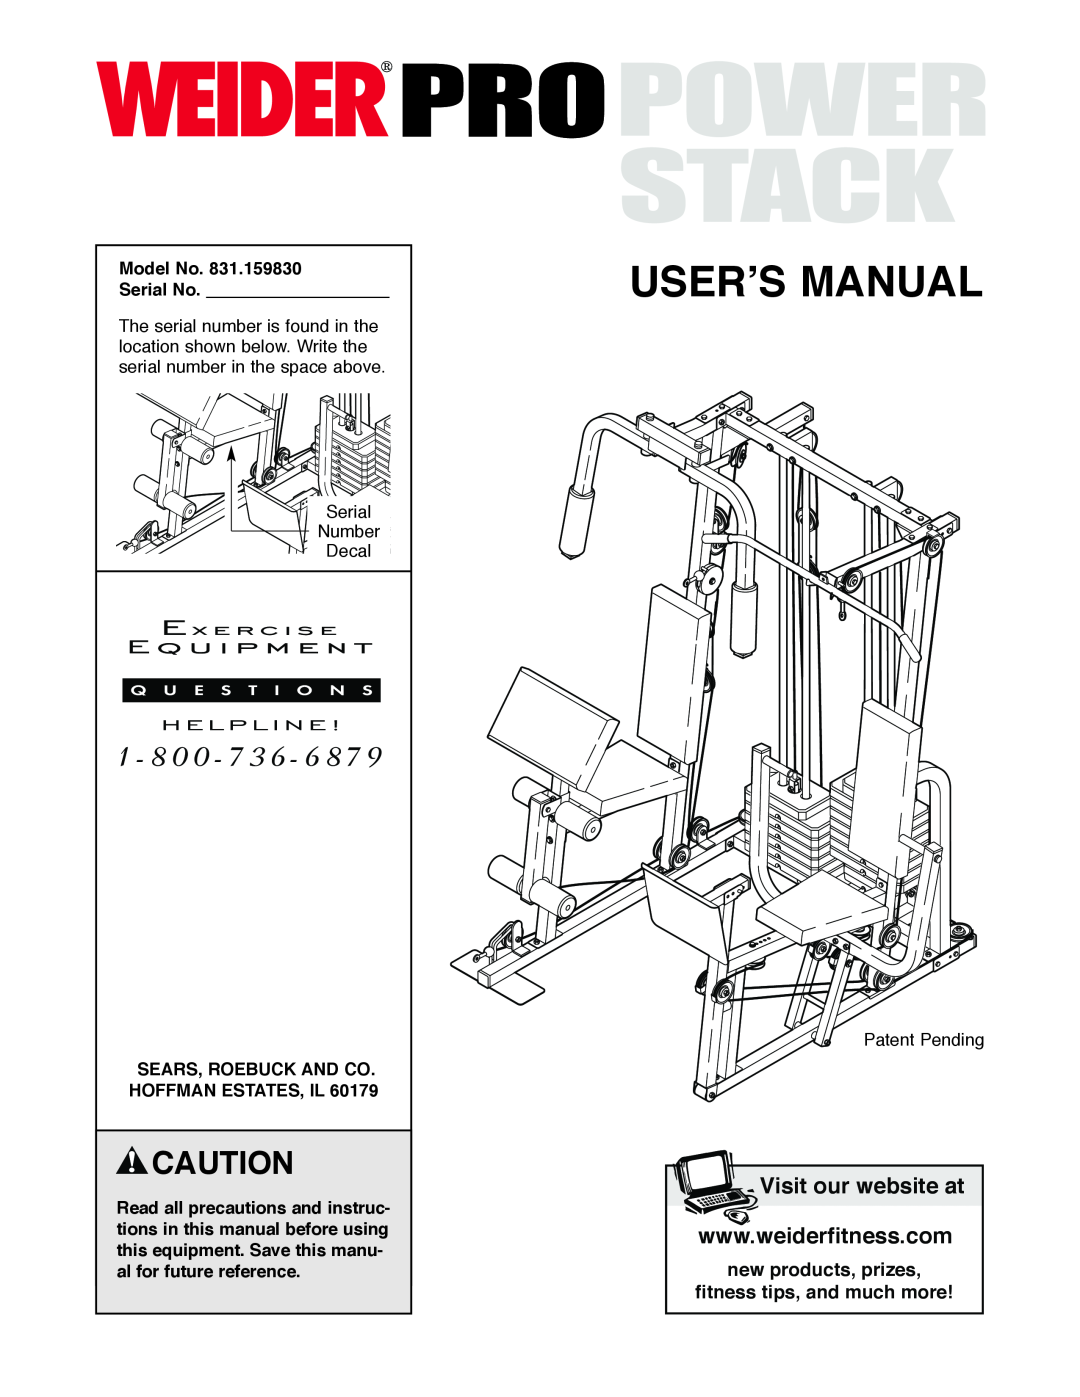 Weider 831.159830 user manual Visit our website at, User’S Manual, new products, prizes fitness tips, and much more 